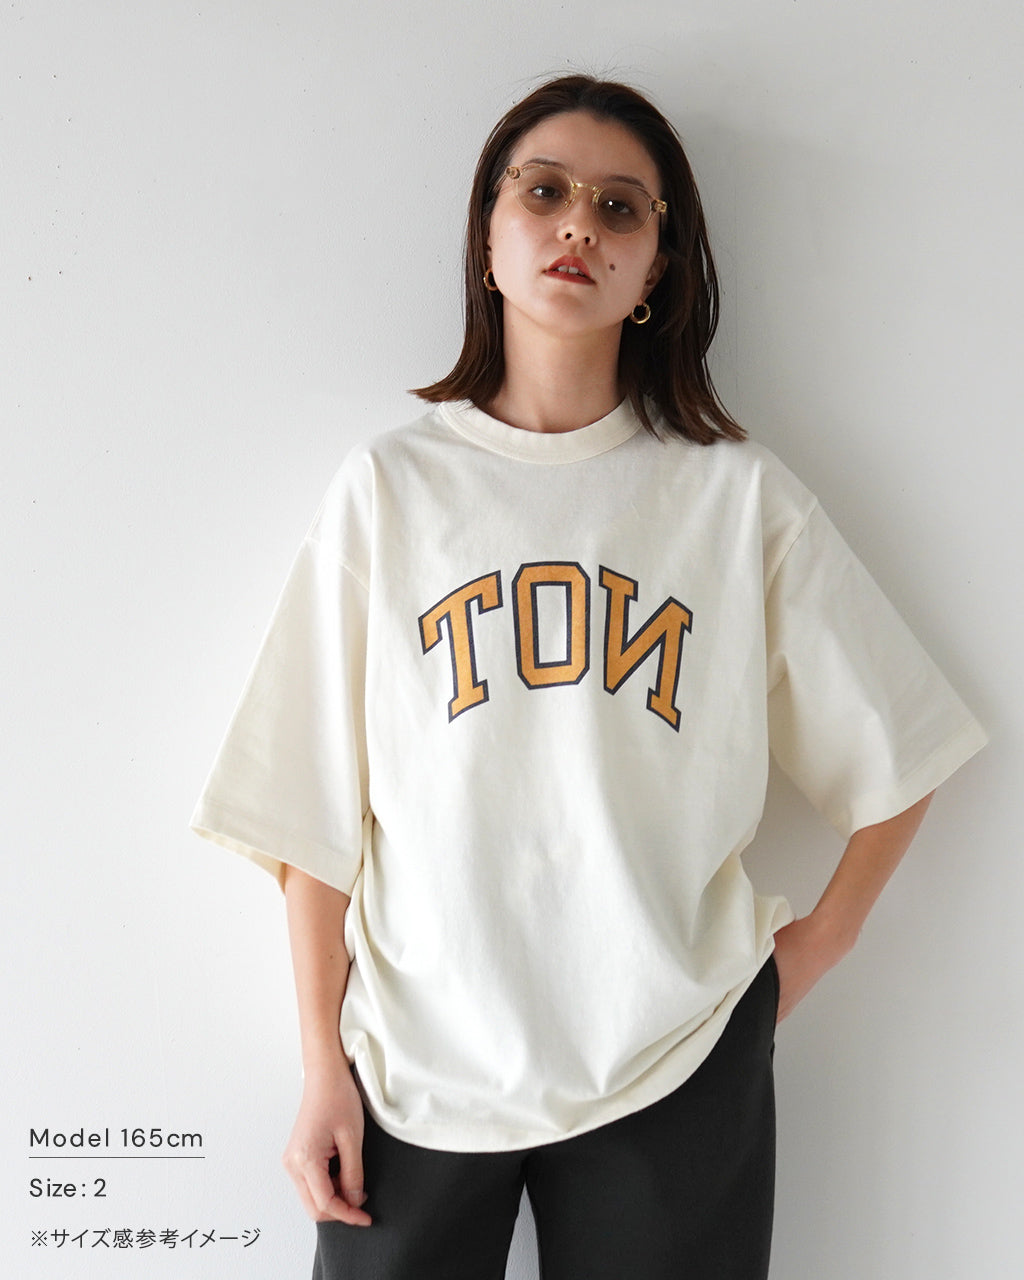 blurhms ROOTSTOCK ブラームス ルーツストック プリント Tシャツ ワイド NOT-WASHING-TON 88/12 Print Tee WIDE【送料無料】正規取扱店